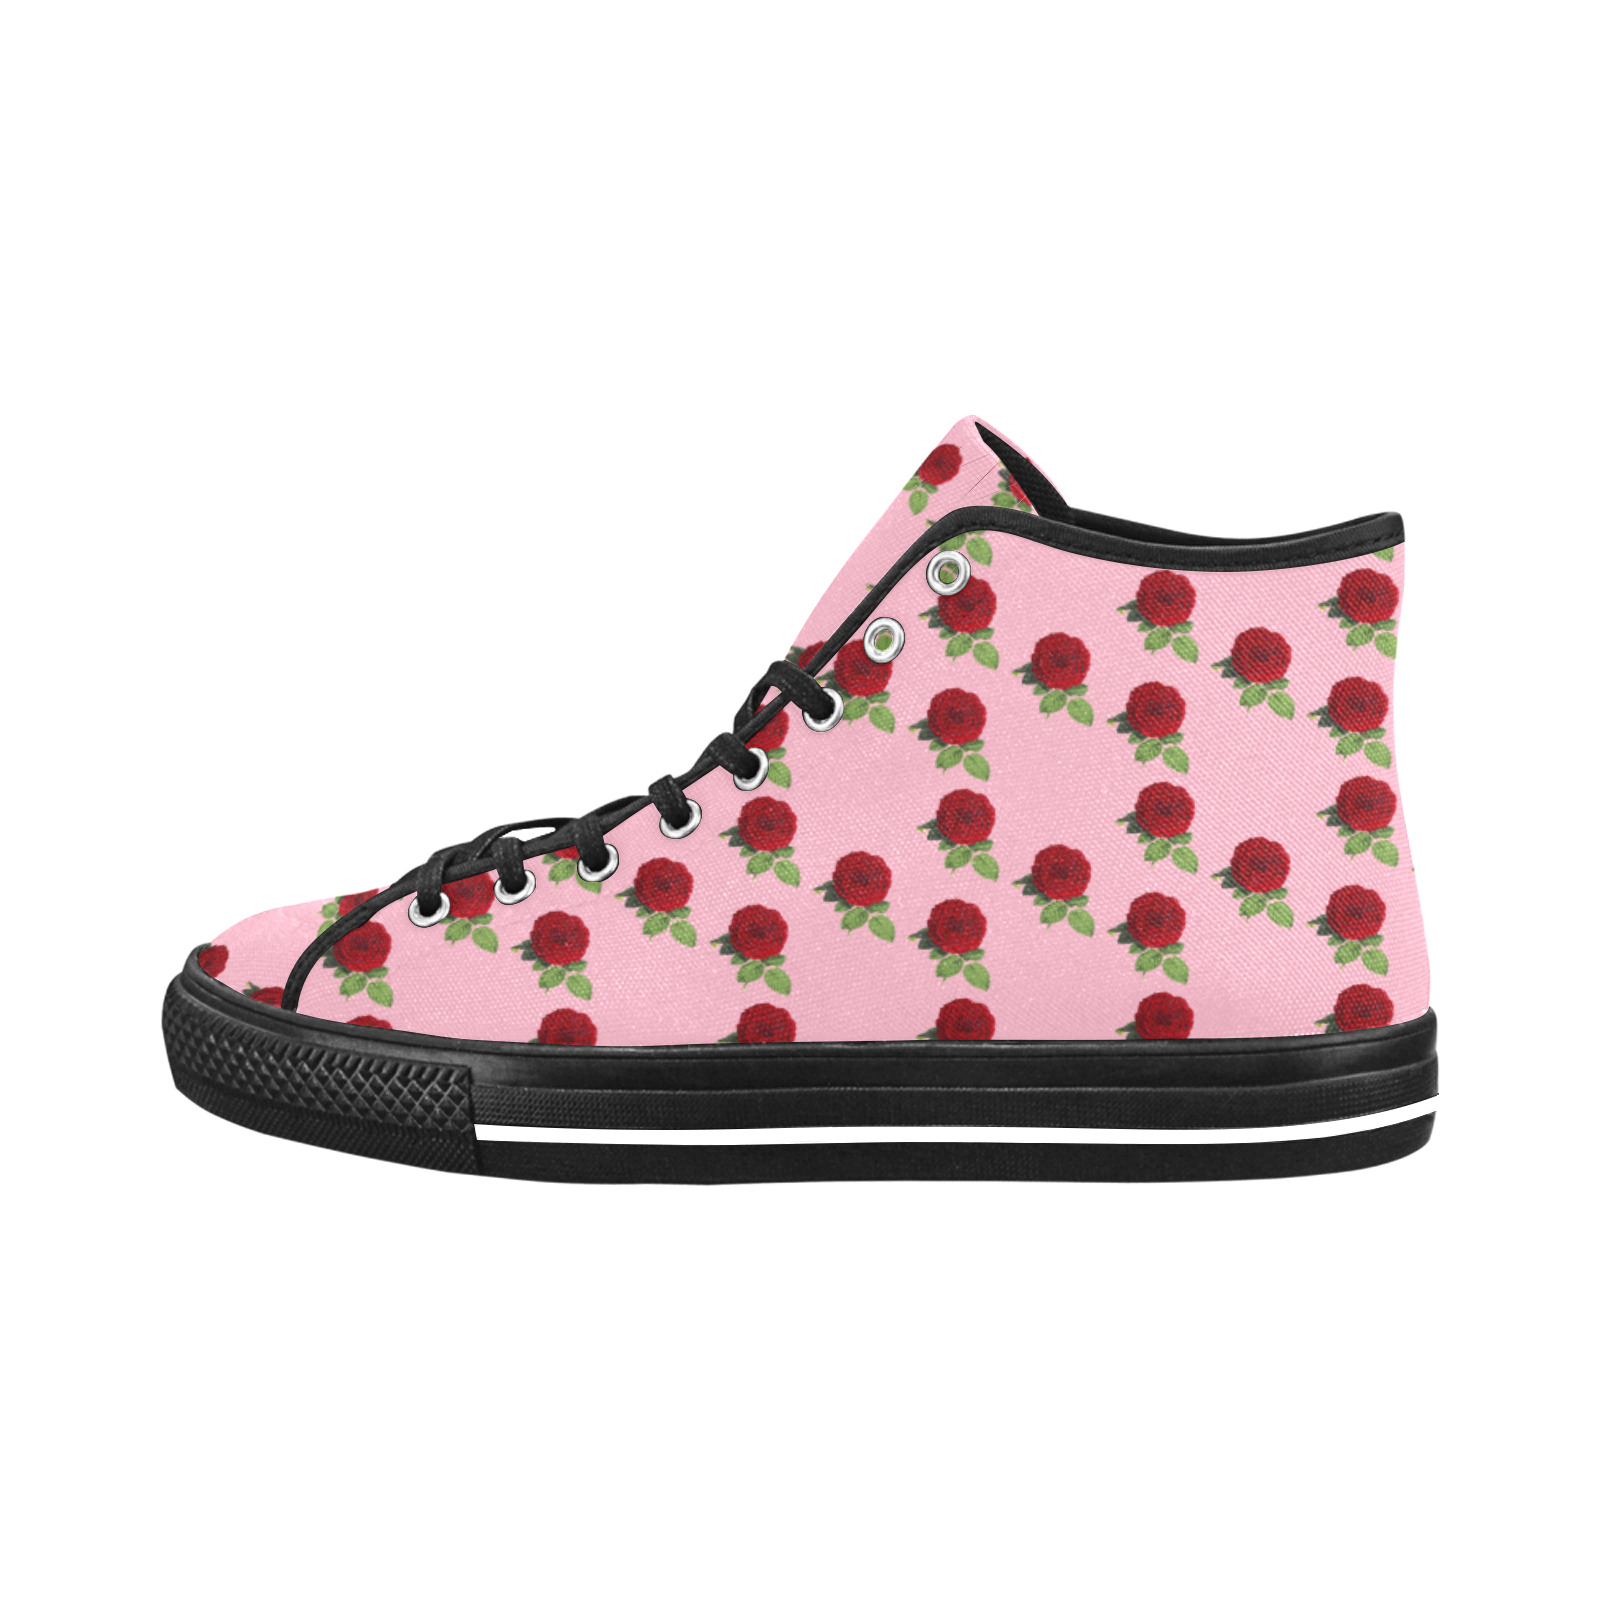 rose in pink Vancouver H Women's Canvas Shoes (1013-1)